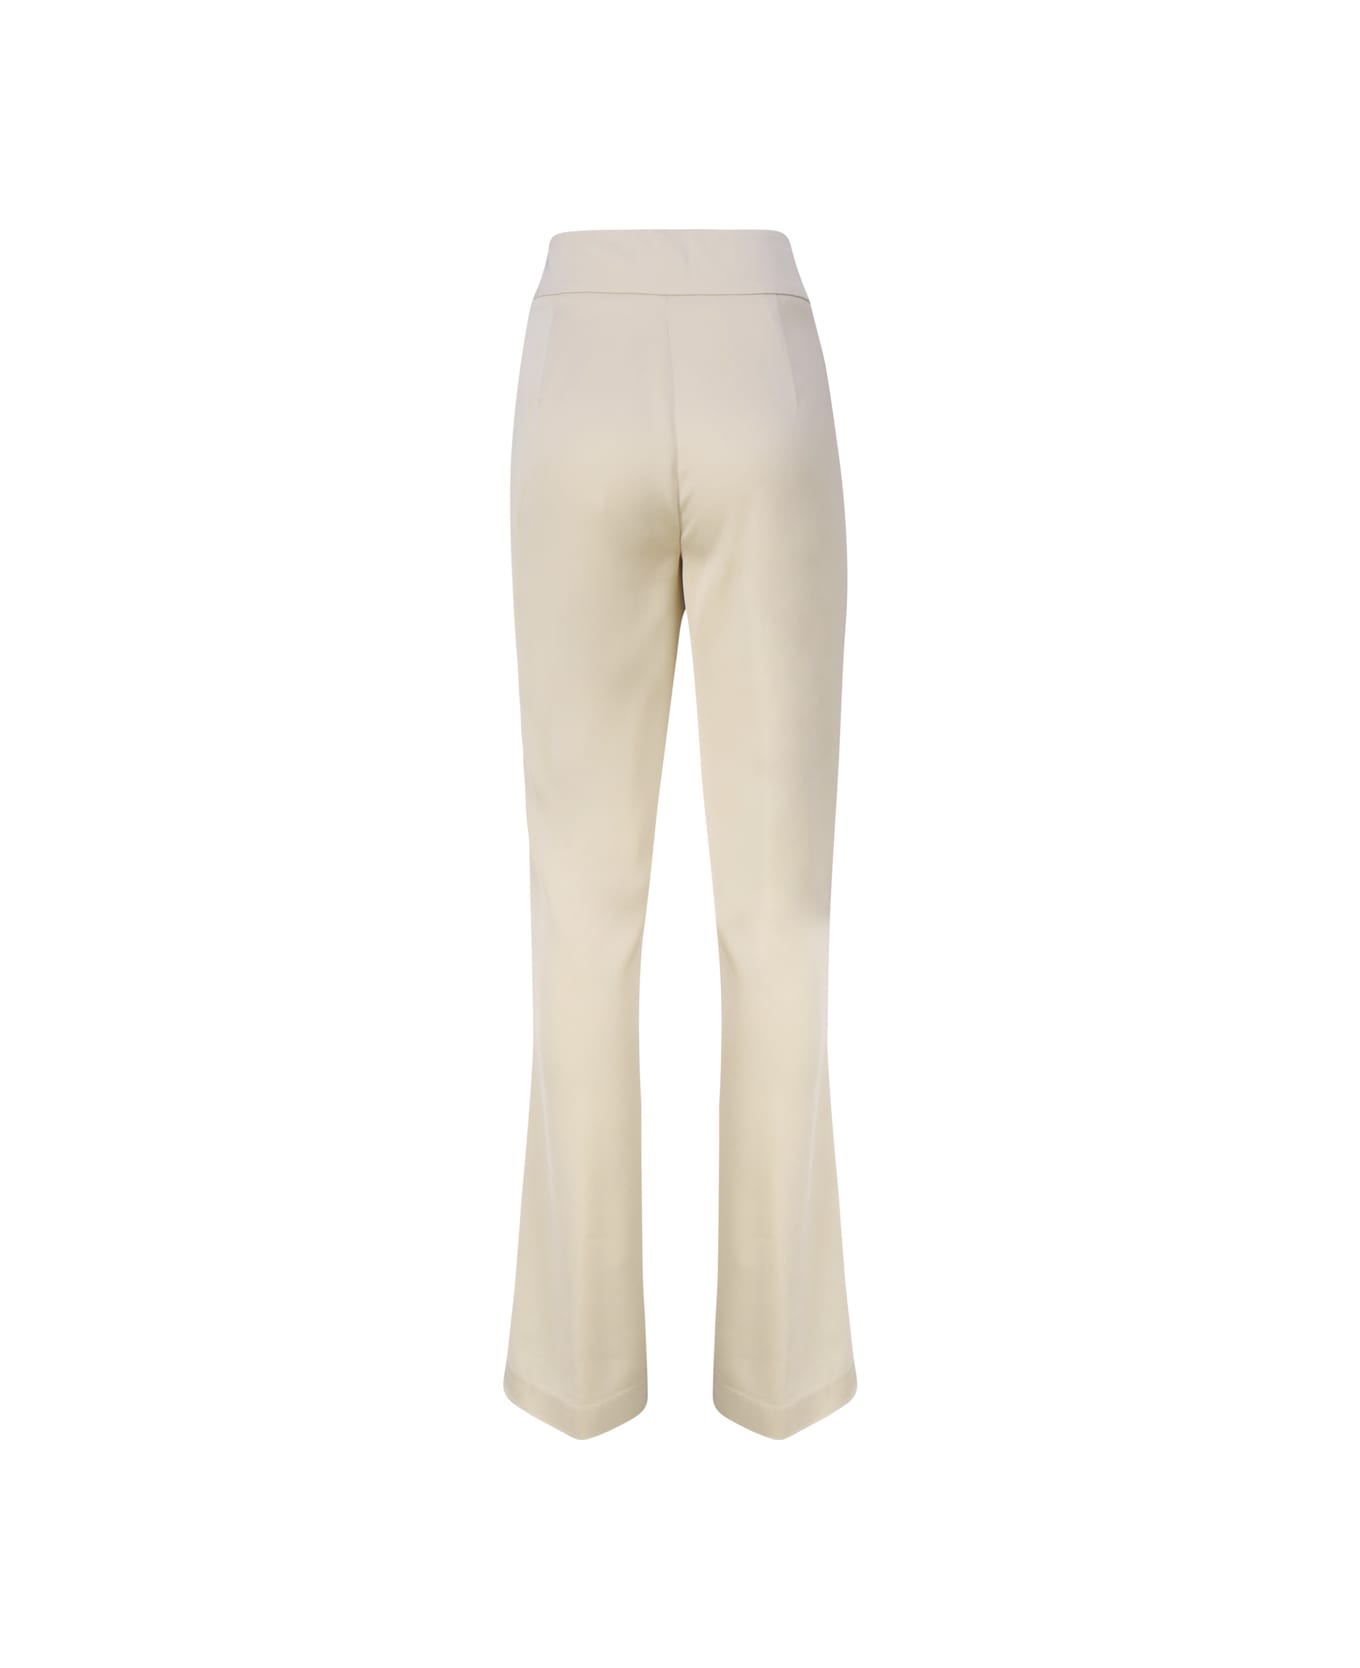 Genny Elegant Trousers In Fabric - Rainy day